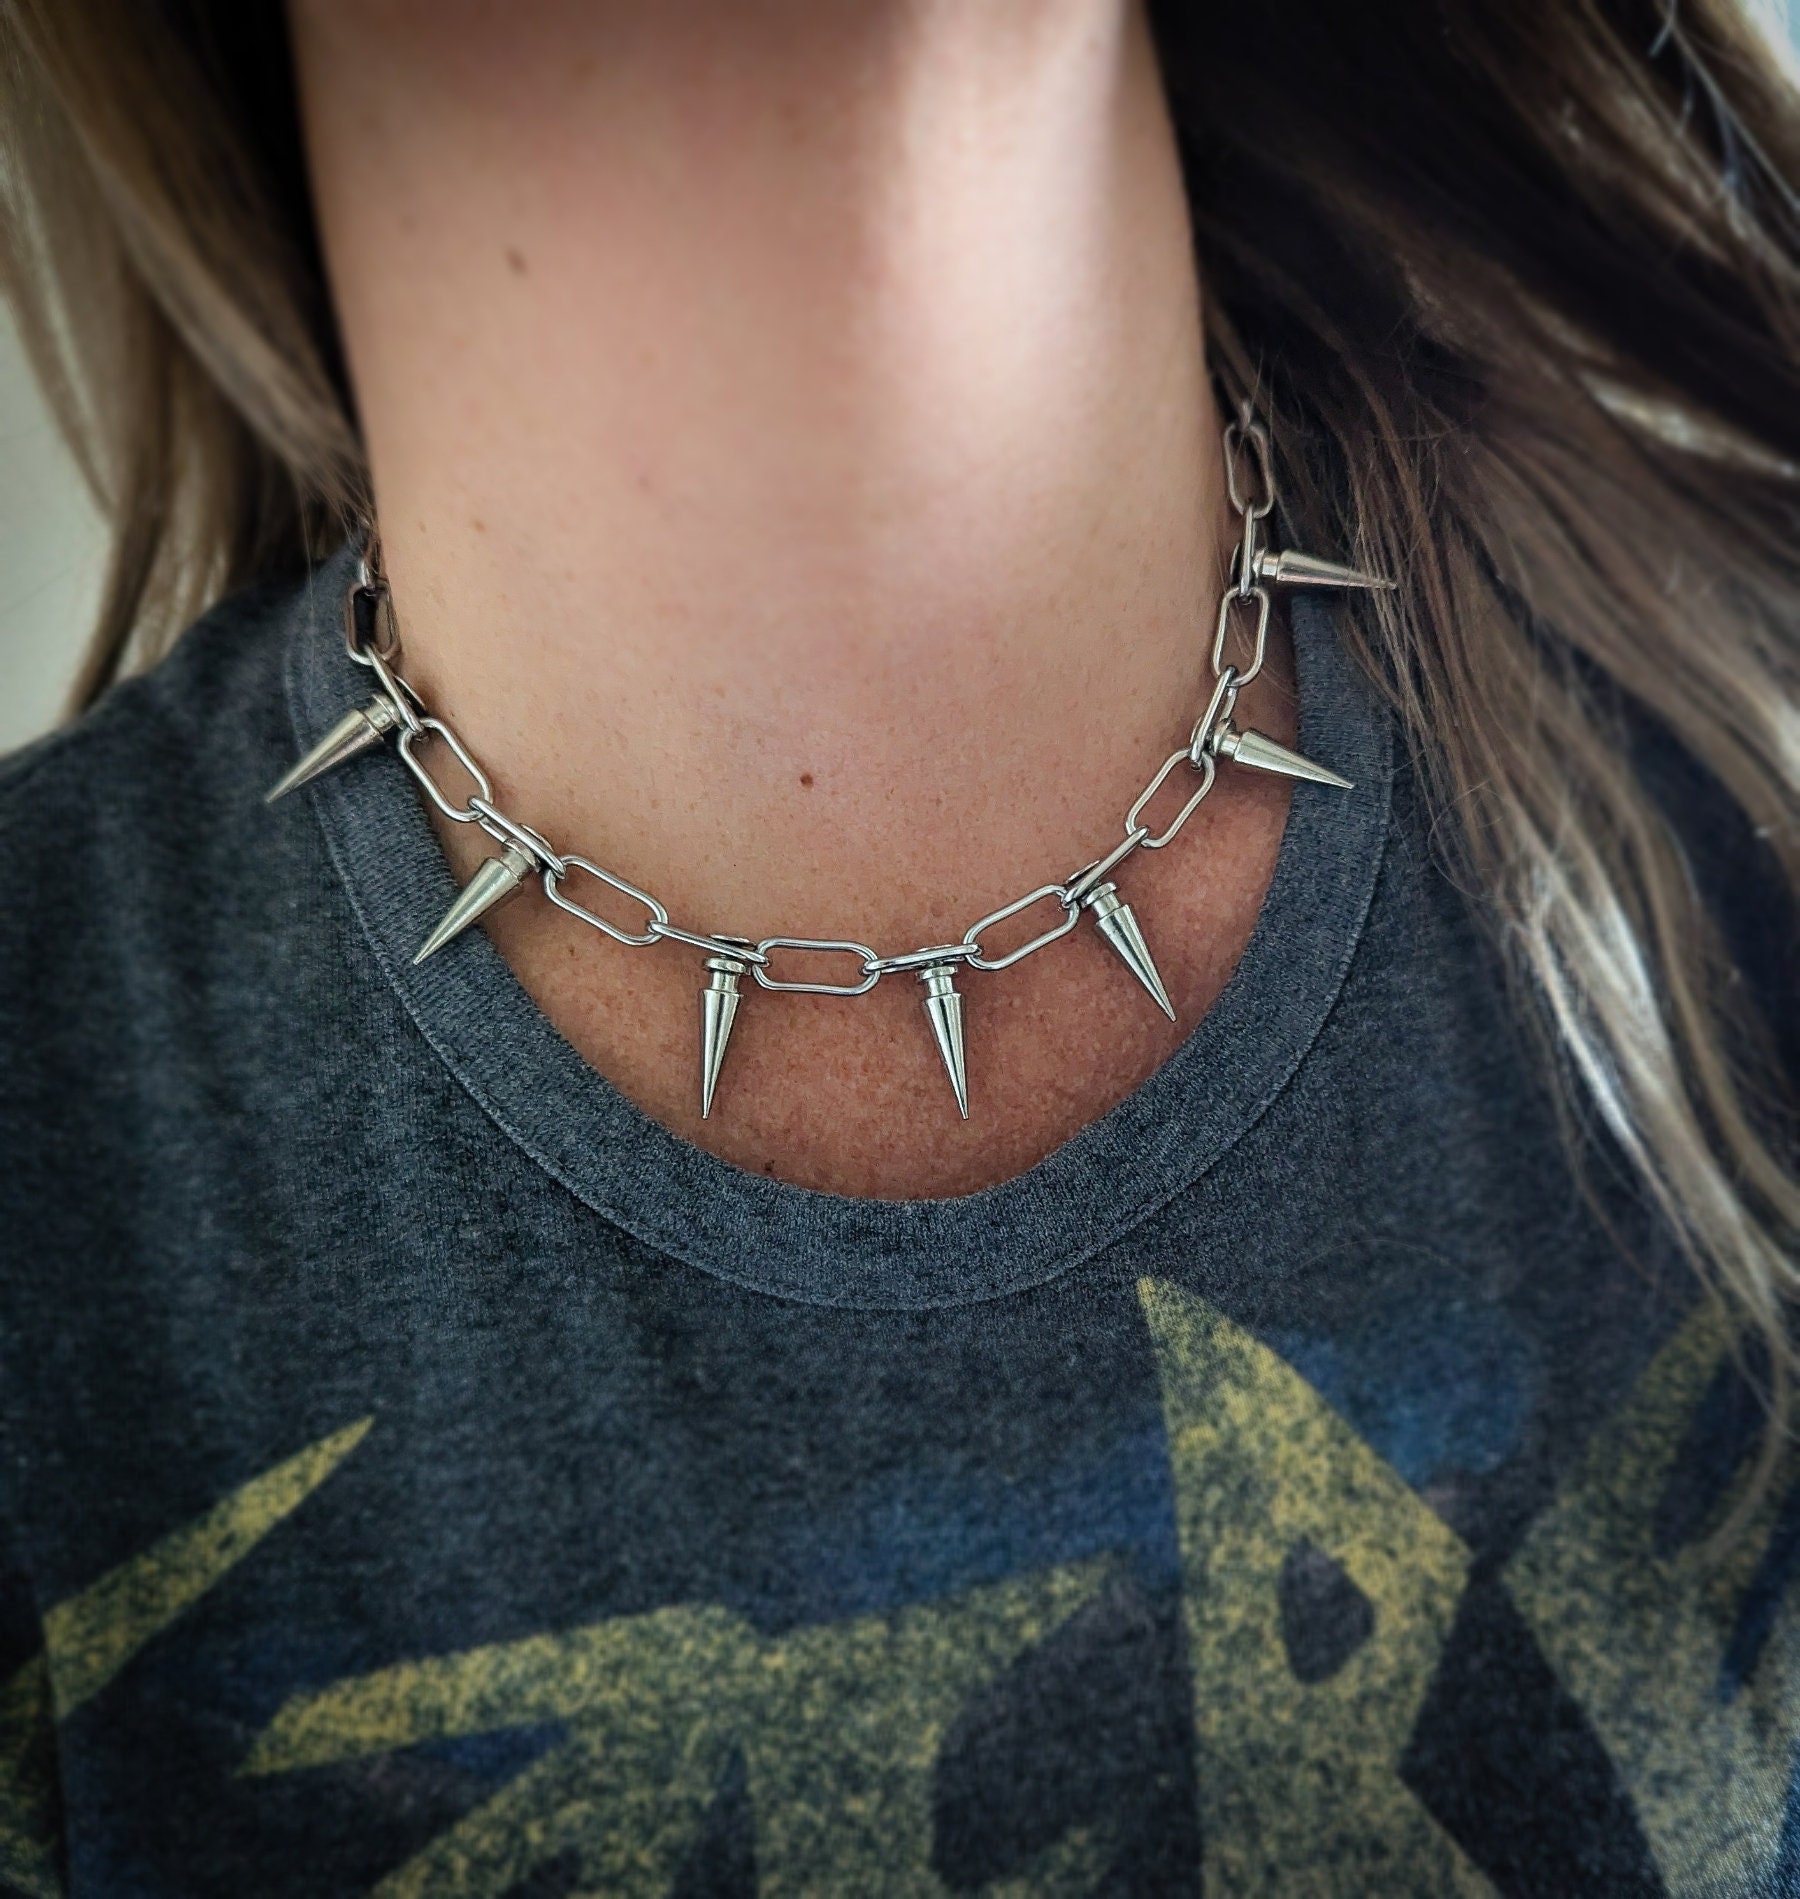 Spike chain choker necklace, gothic jewelry, spike necklace, paperclip  chain, stainless steel, punk necklace, punk jewellery, grunge, emo